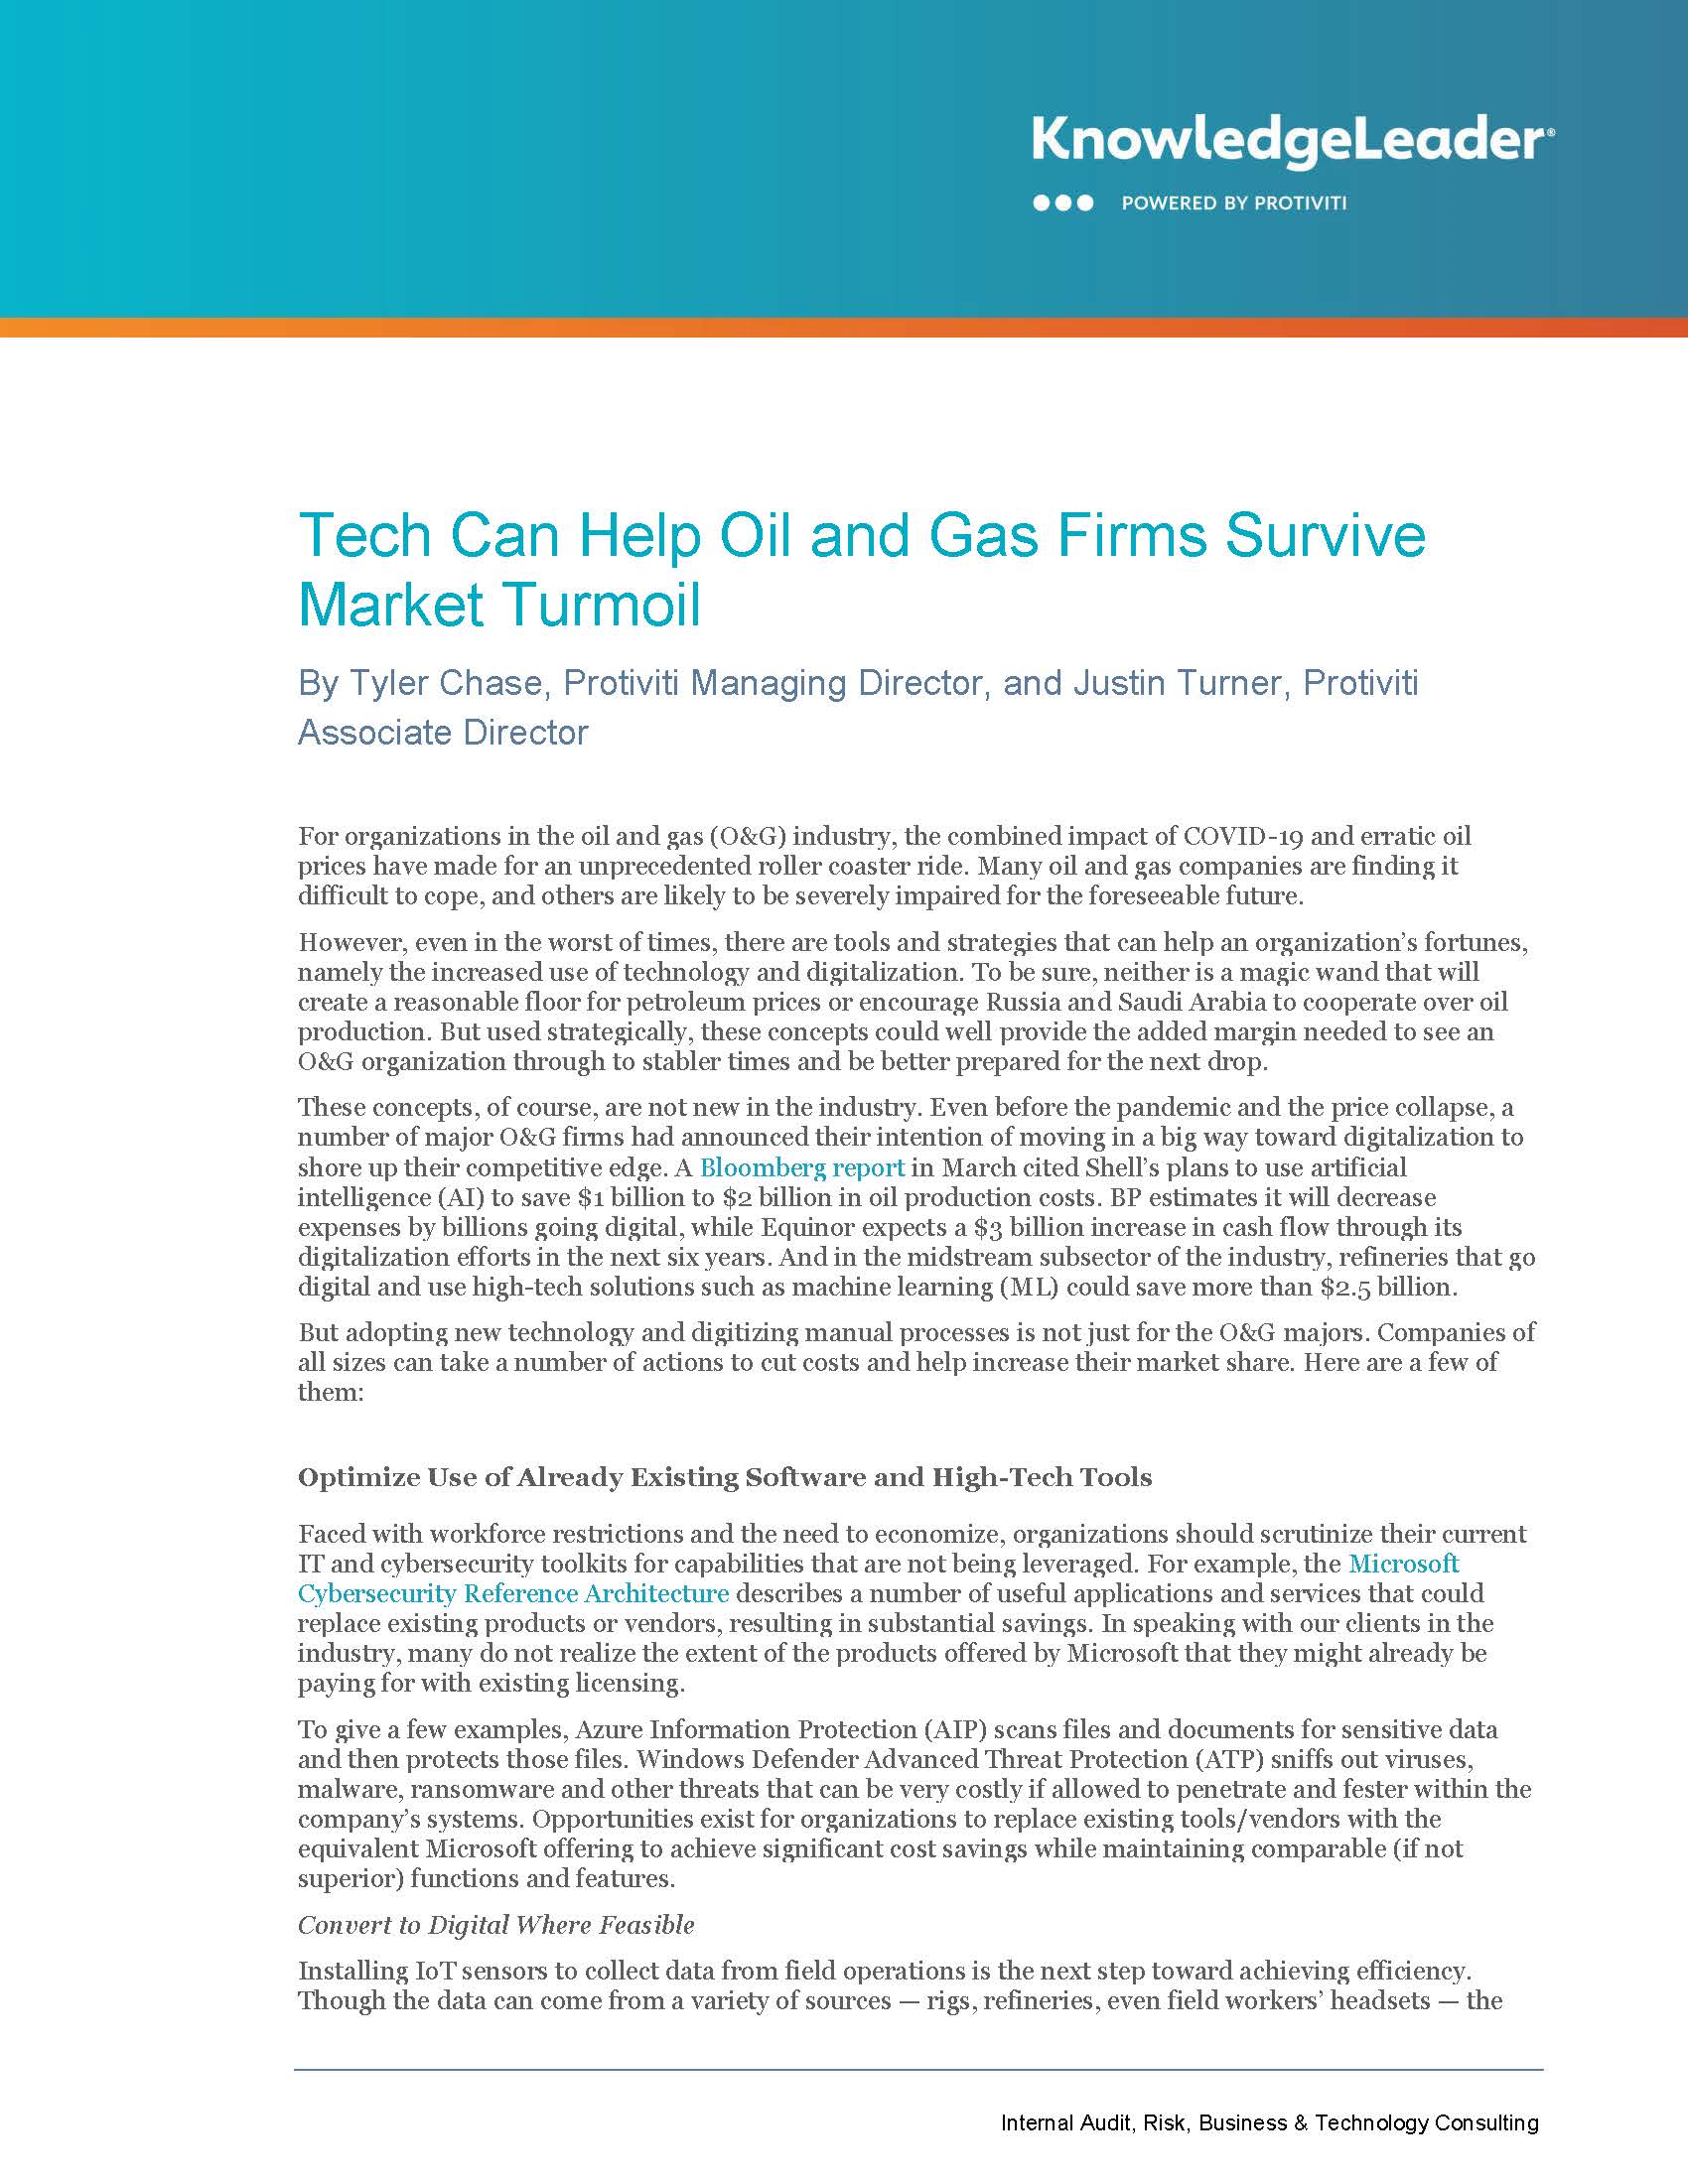 Screenshot of the first page of Tech Can Help Oil and Gas Firms Survive Market Turmoil